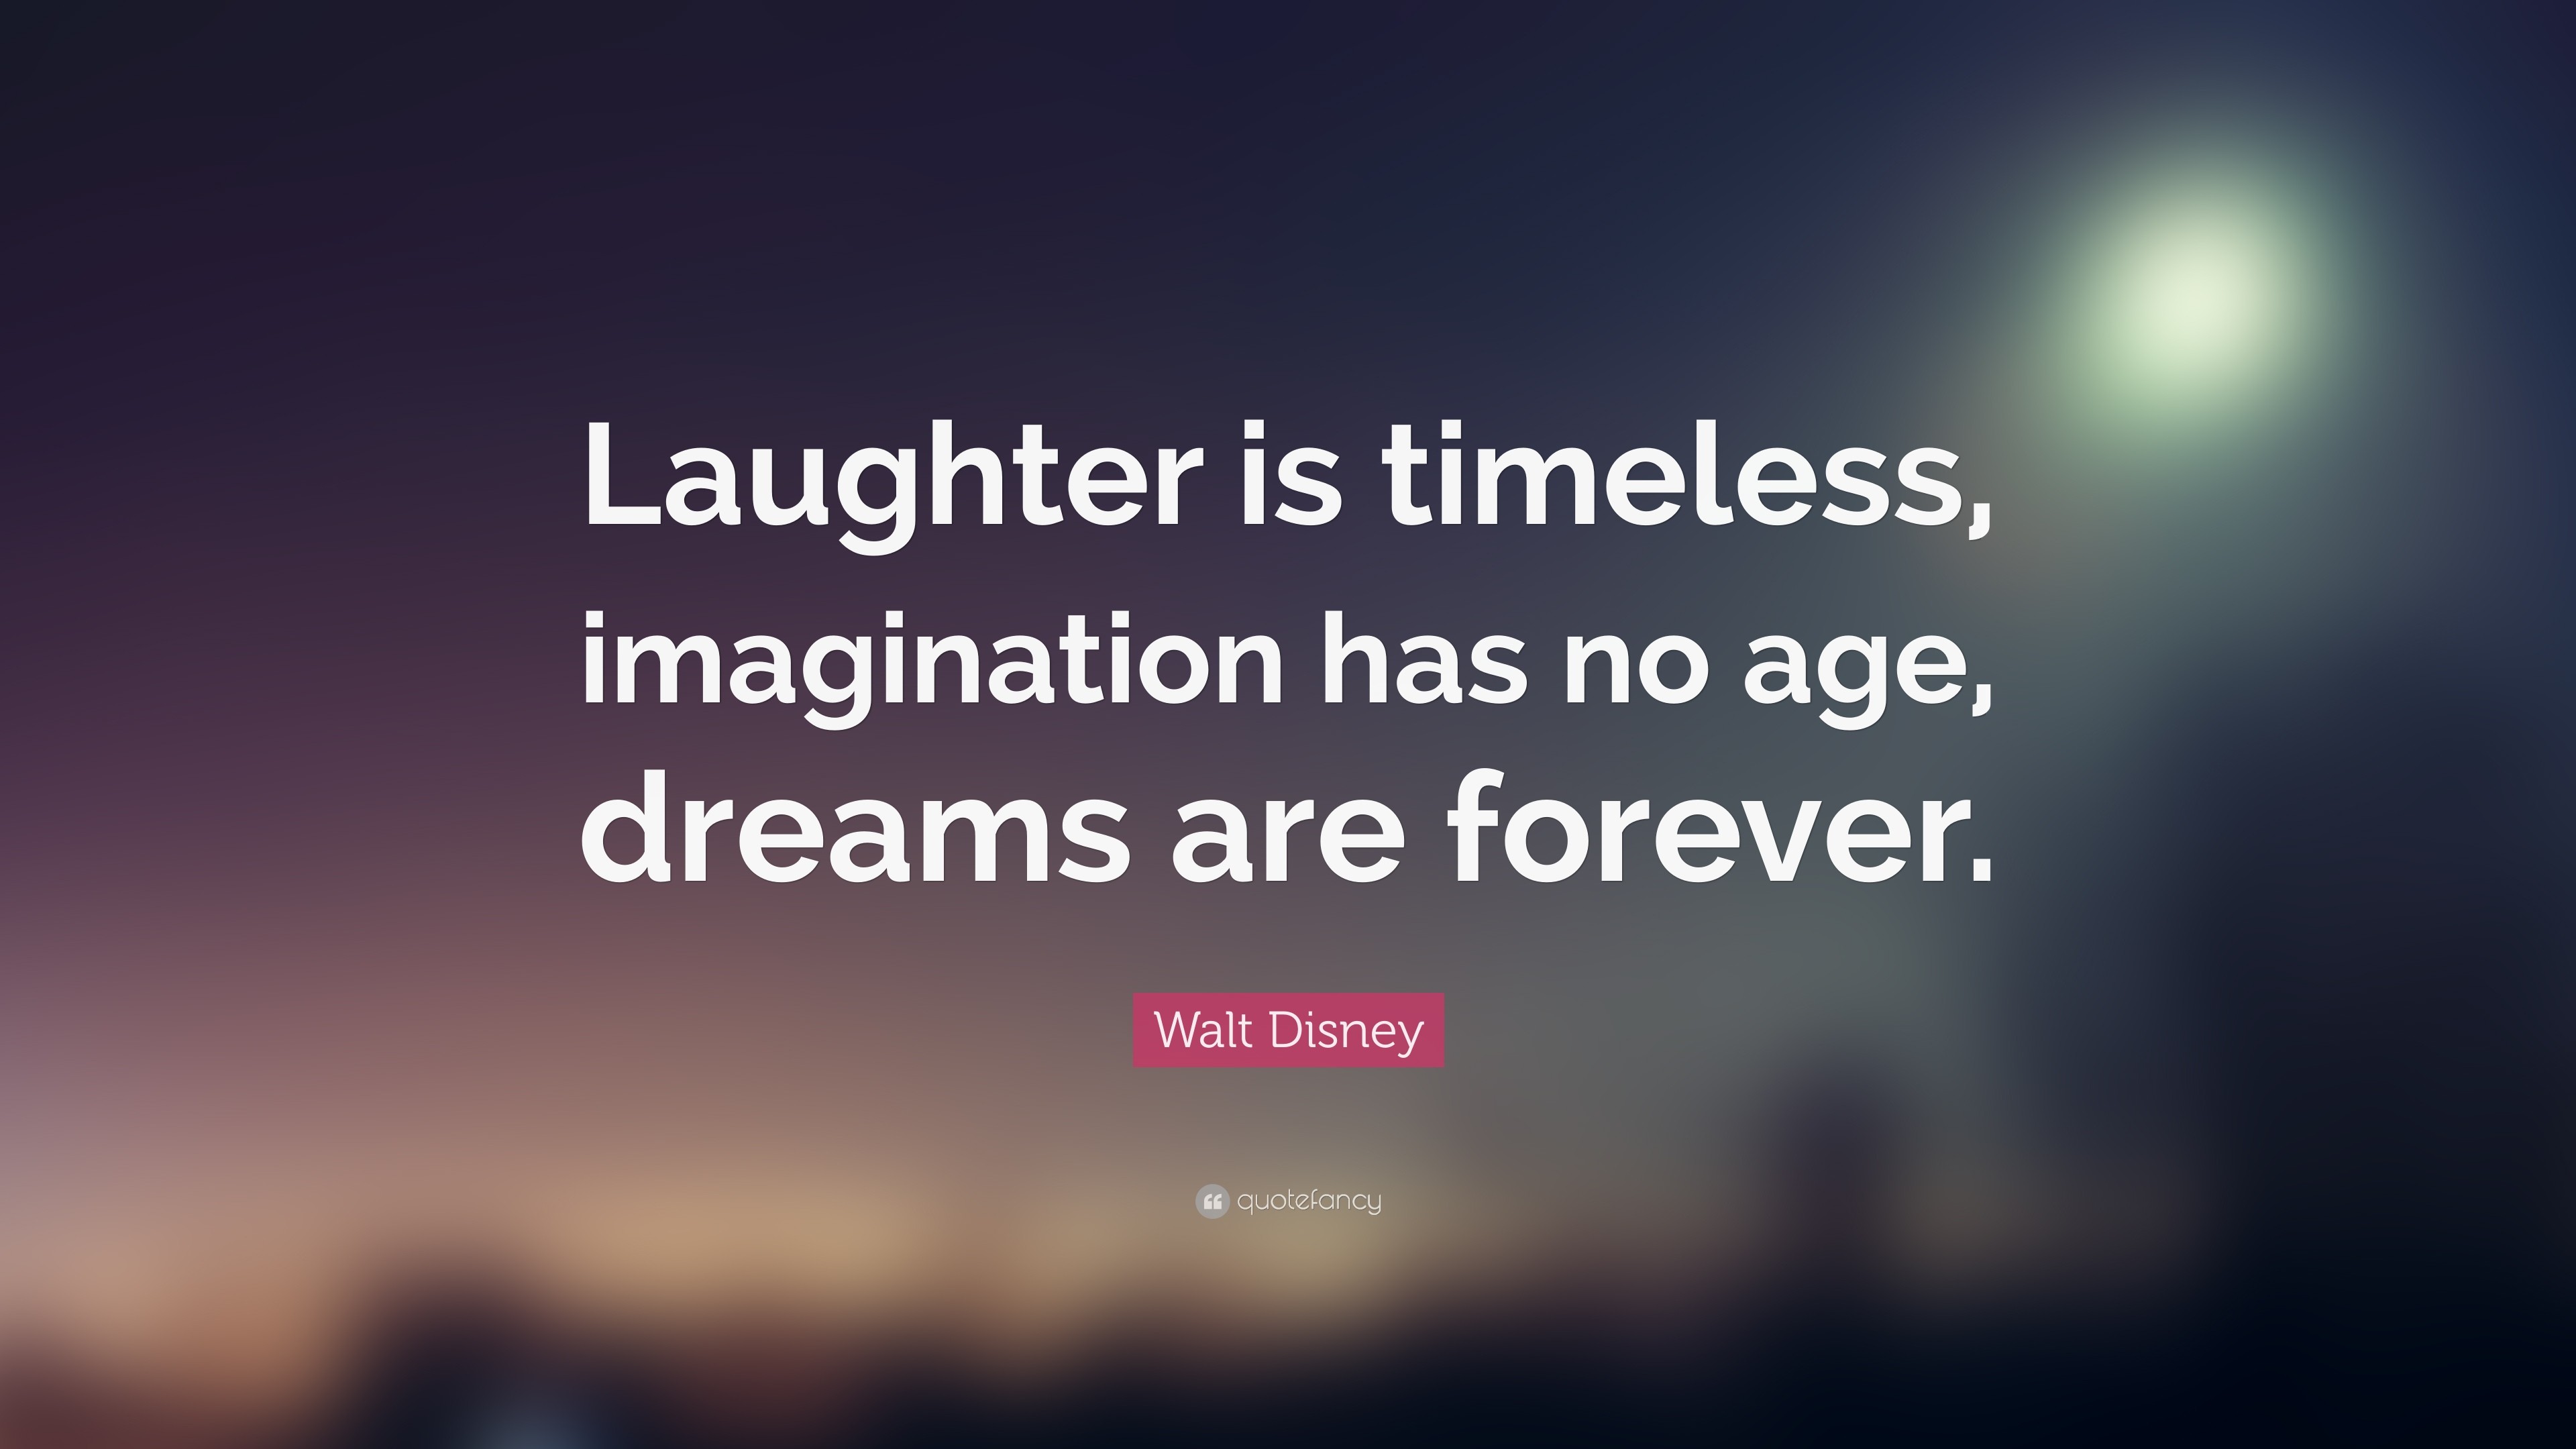 3840x2160 ... iphone wallpaper wallpapersafari; walt disney quote laughter is  timeless imagination has no age ...